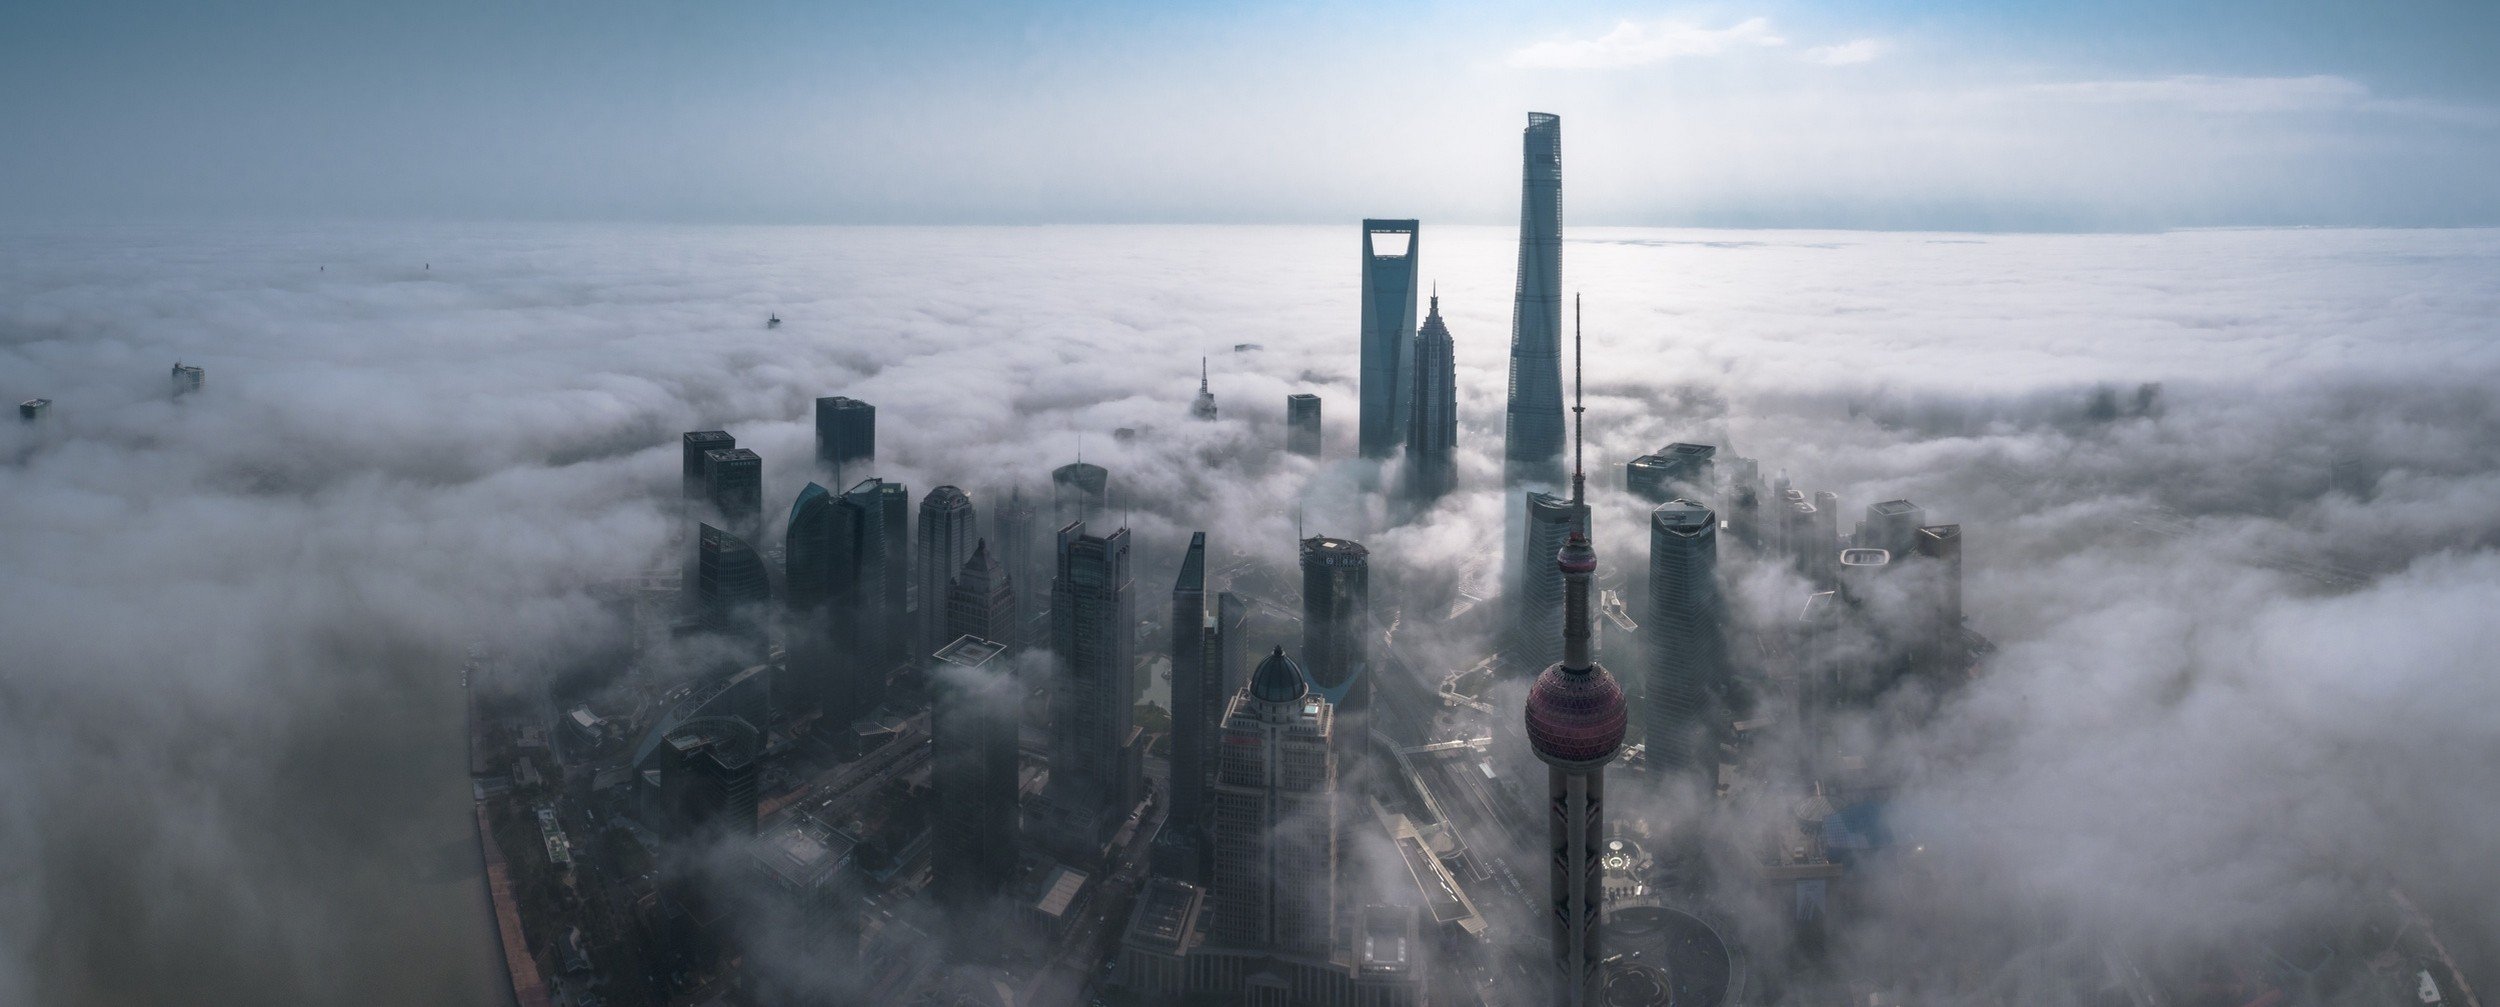 photography, Cityscape, Mist, Skyscraper, Architecture, Metropolis, Building, Morning, Sunlight, Aerial view, Shanghai, China, Panorama Wallpaper